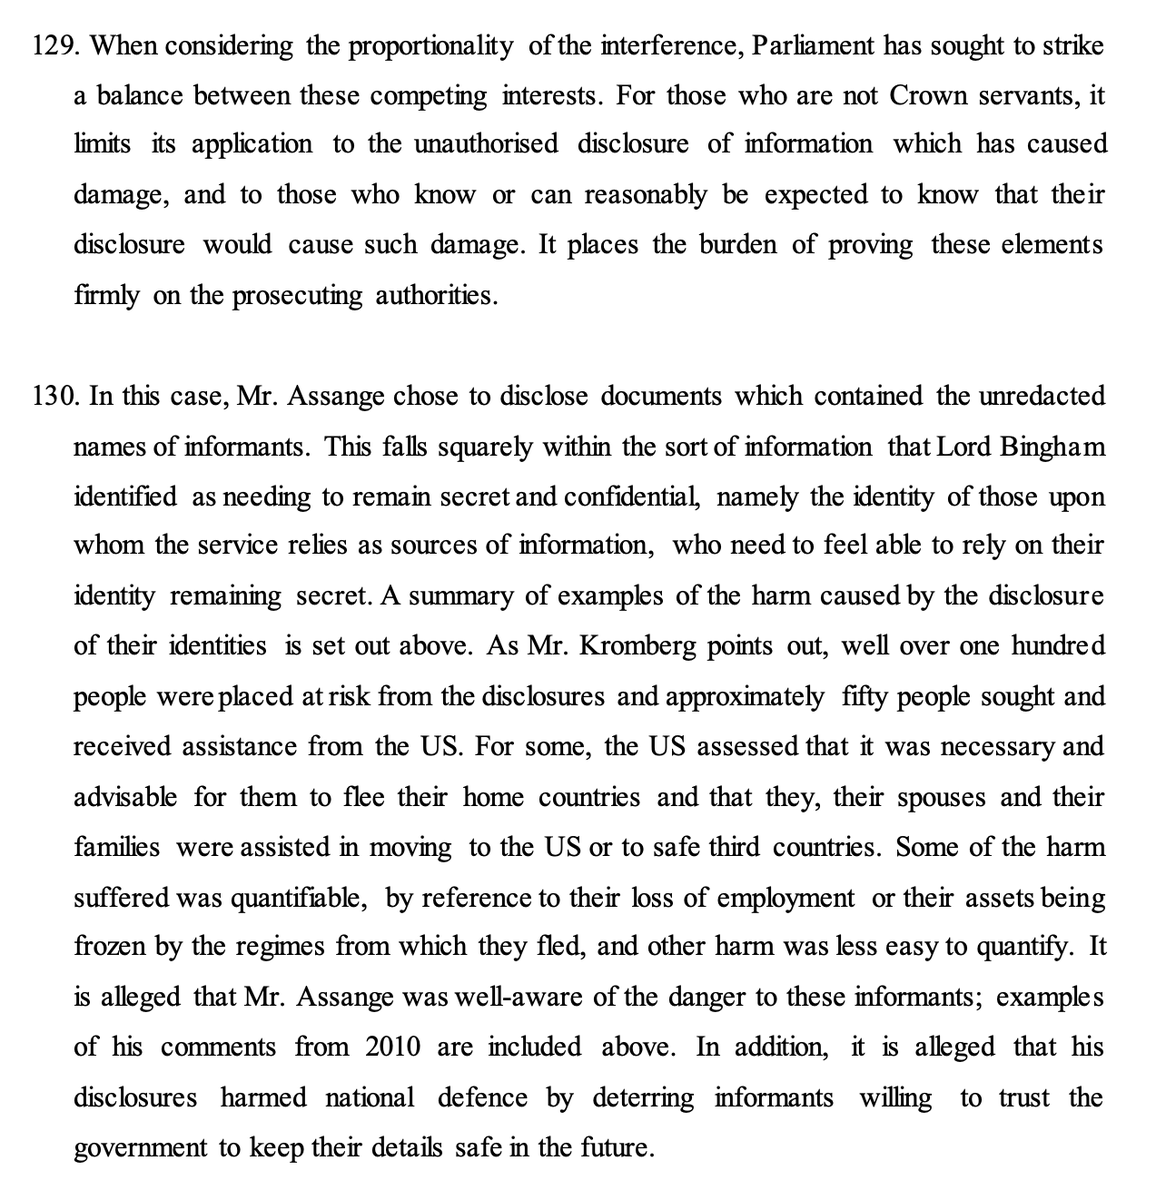 Here's Baraitser's ruling on the publication offenses. She cited media outlets criticizing WL's publication without redaction.